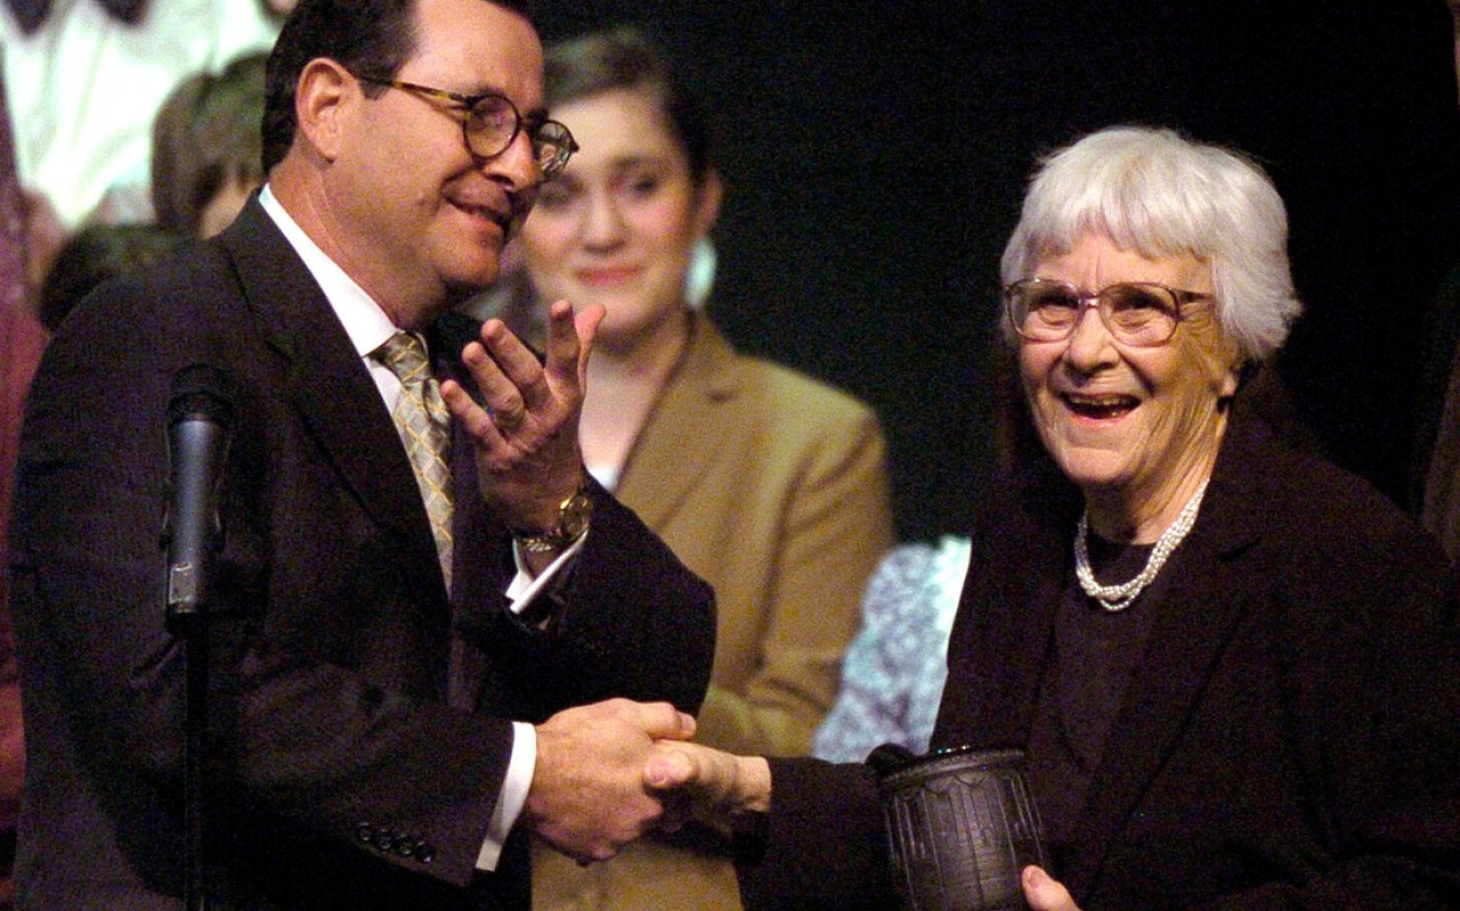 What awards did Harper Lee win?